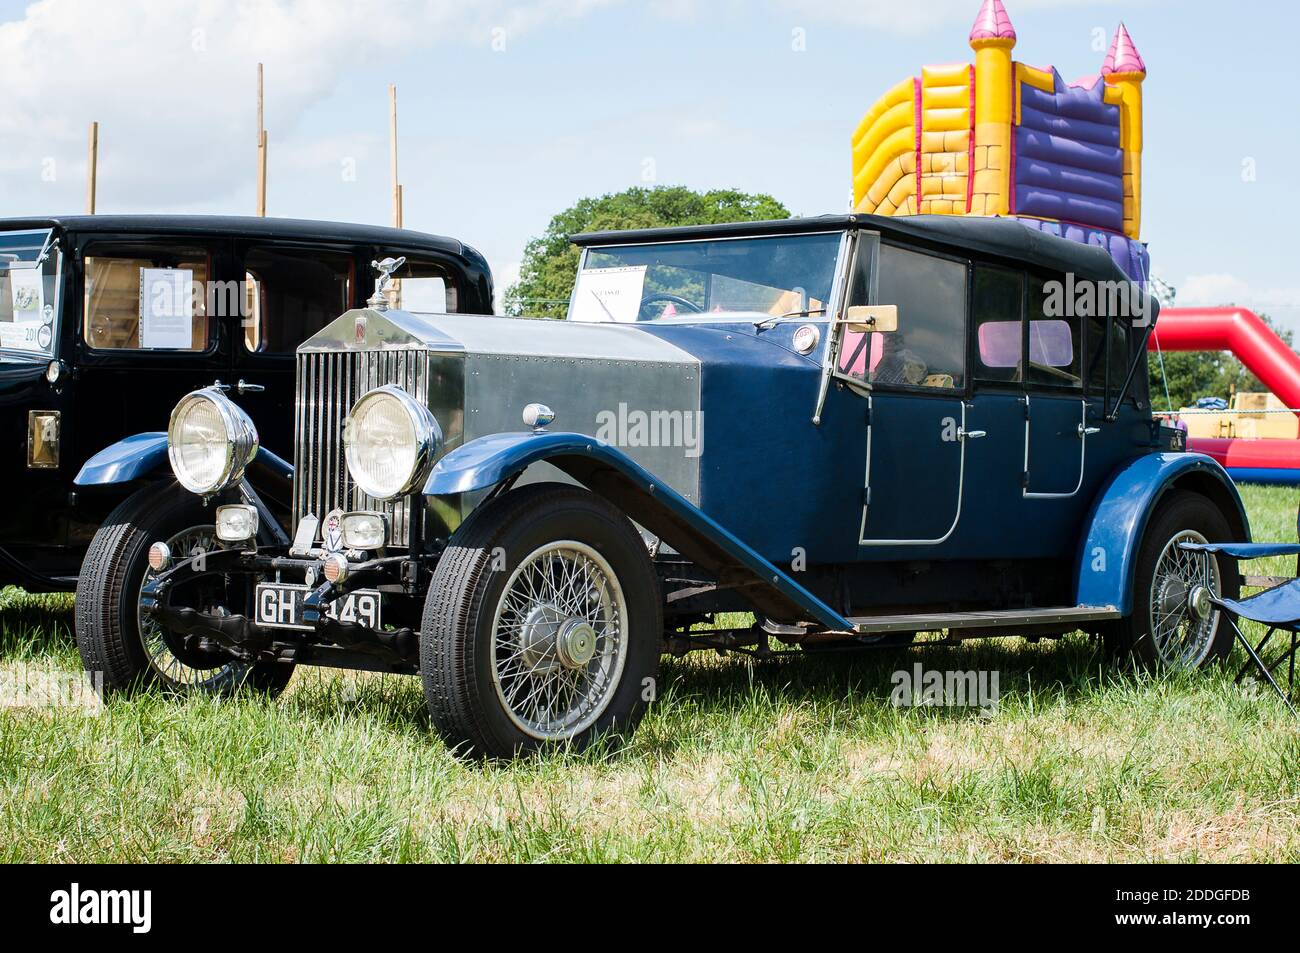 1930 Rolls-Royce 20/25 Tourer on display at a country show in England UK showing front/side view Stock Photo